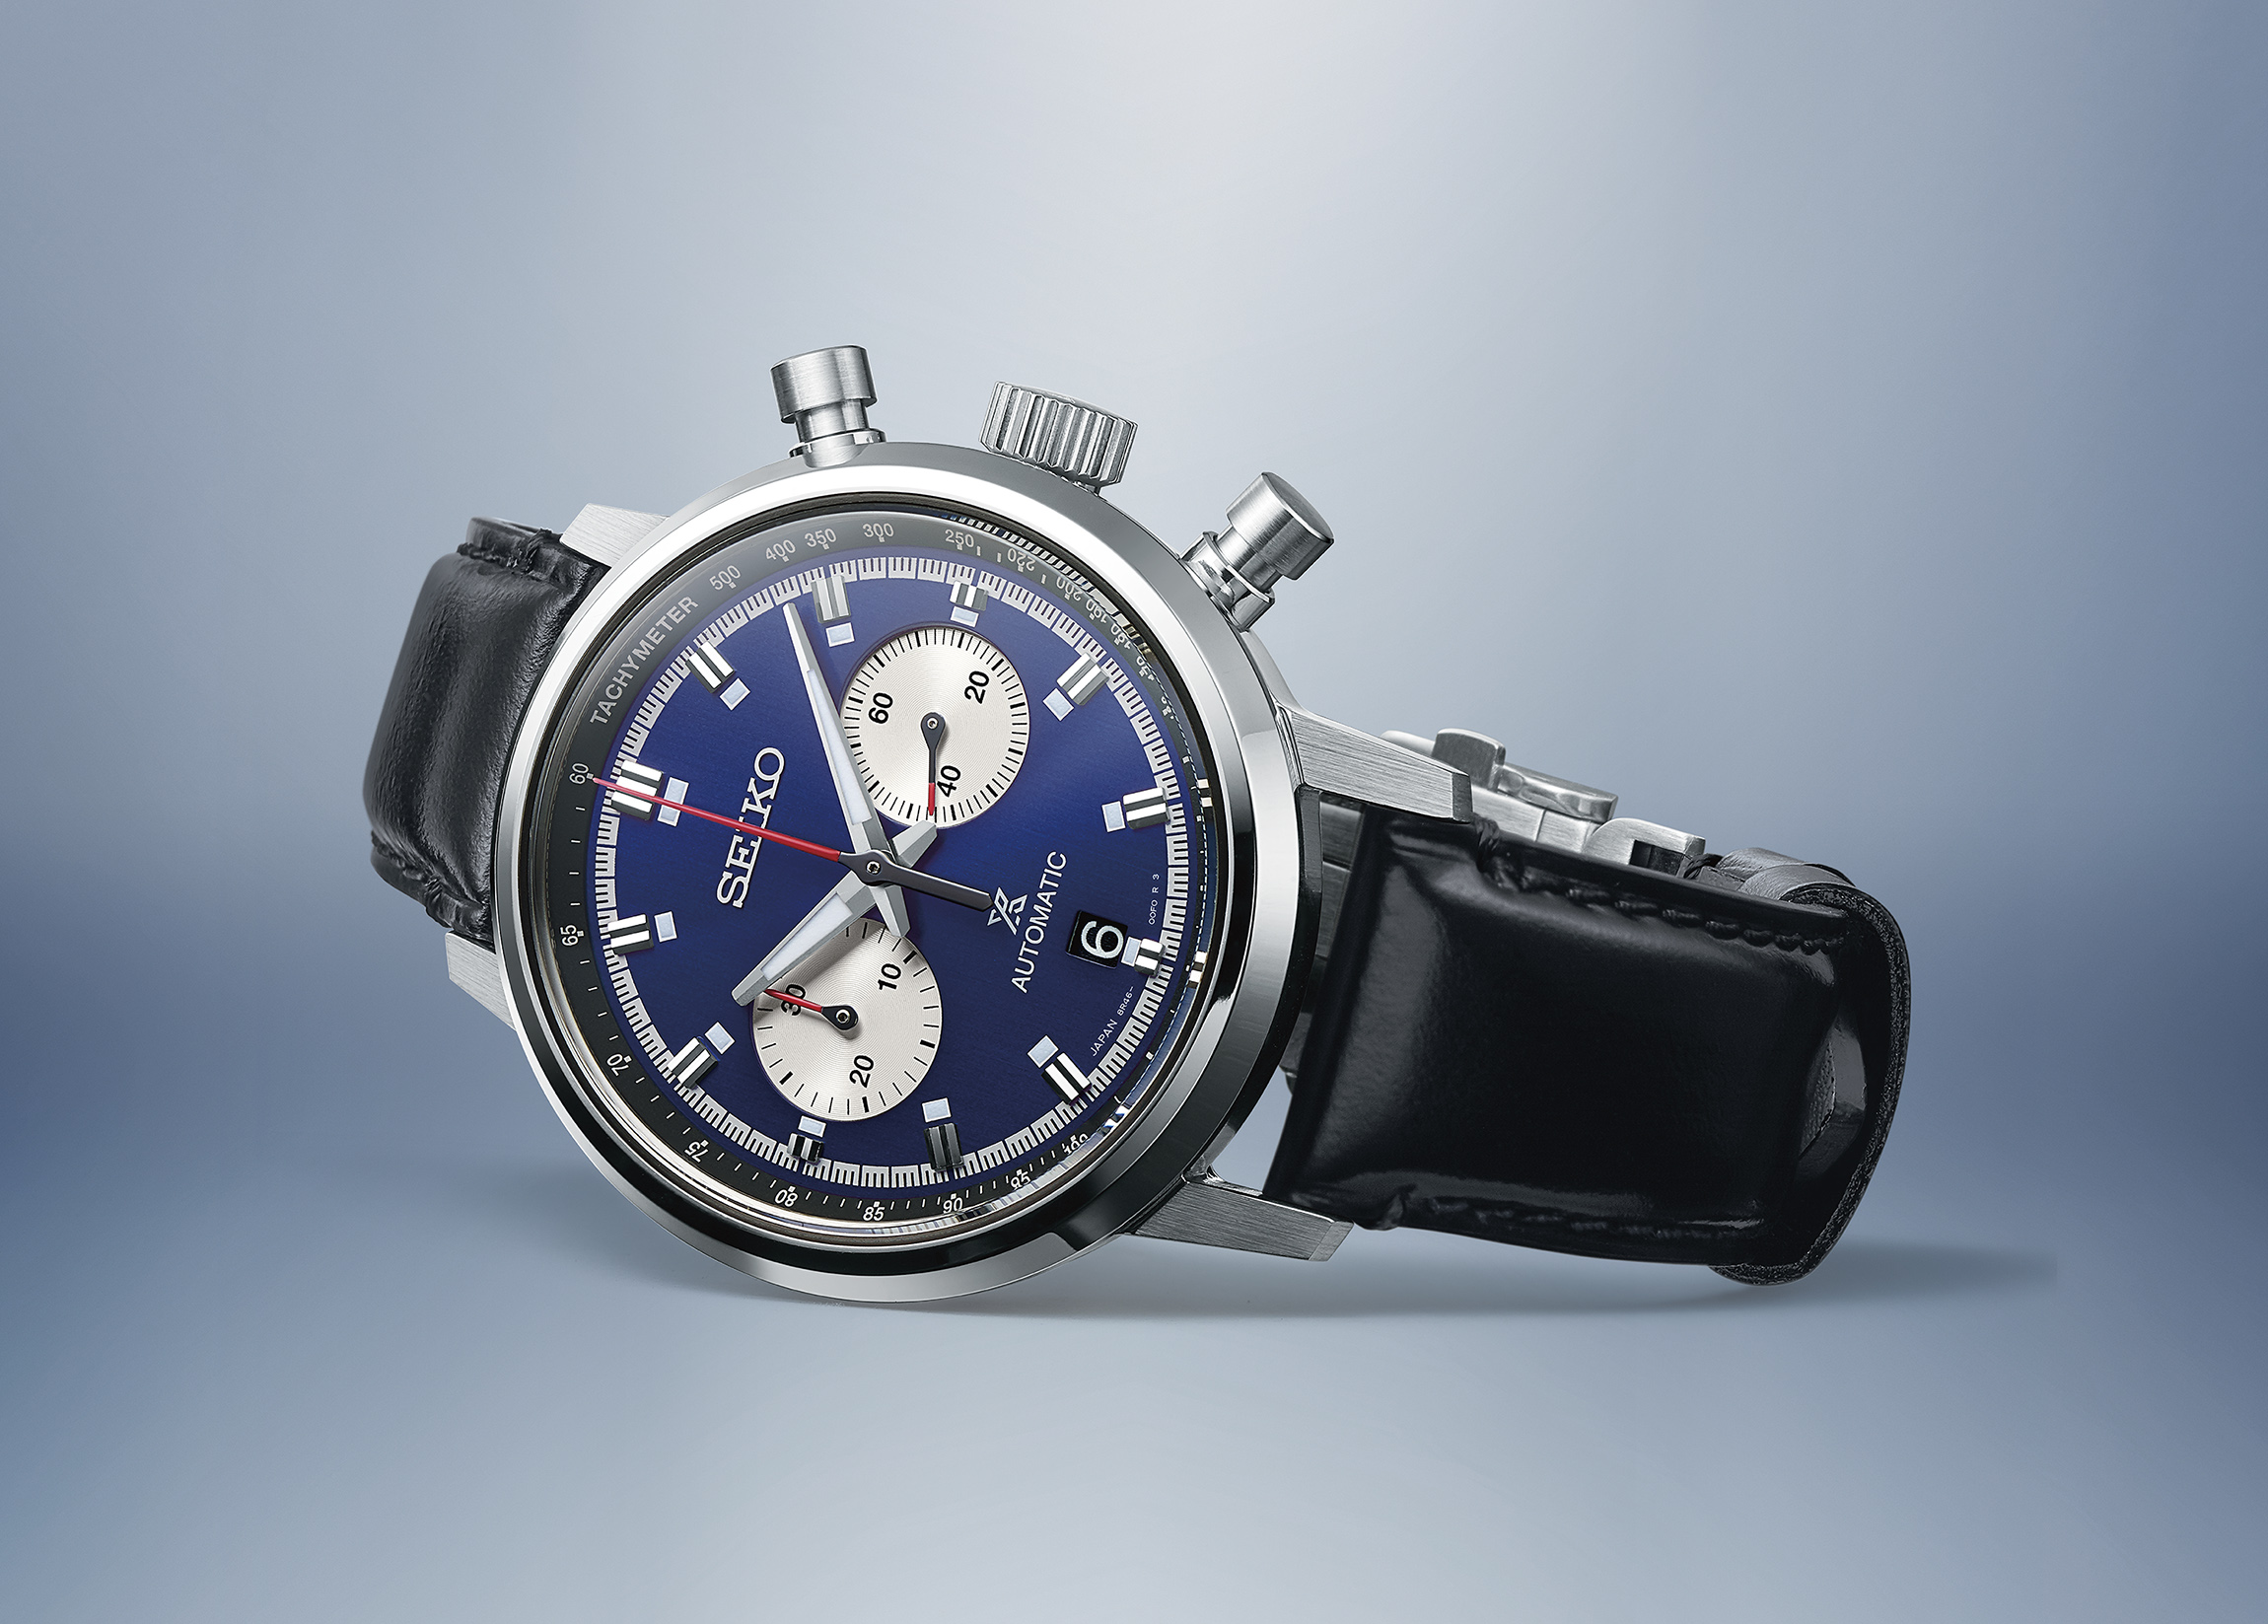 Introducing the Seiko Prospex Speedtimer With a Blue Dial